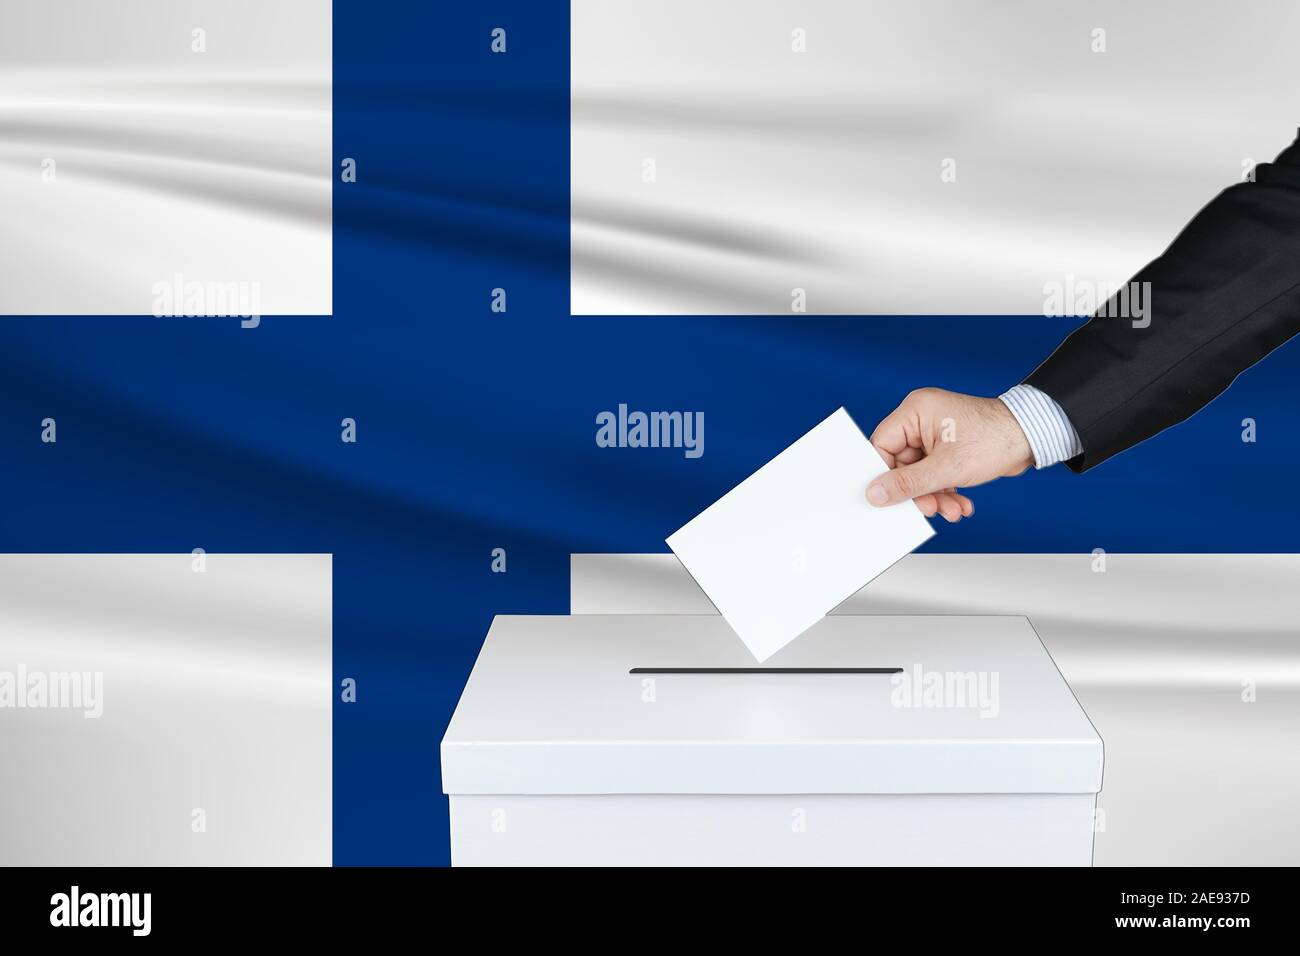 Election in Finland. The hand of man putting his vote in the ballot box. Waved Finland flag on background. Stock Photo